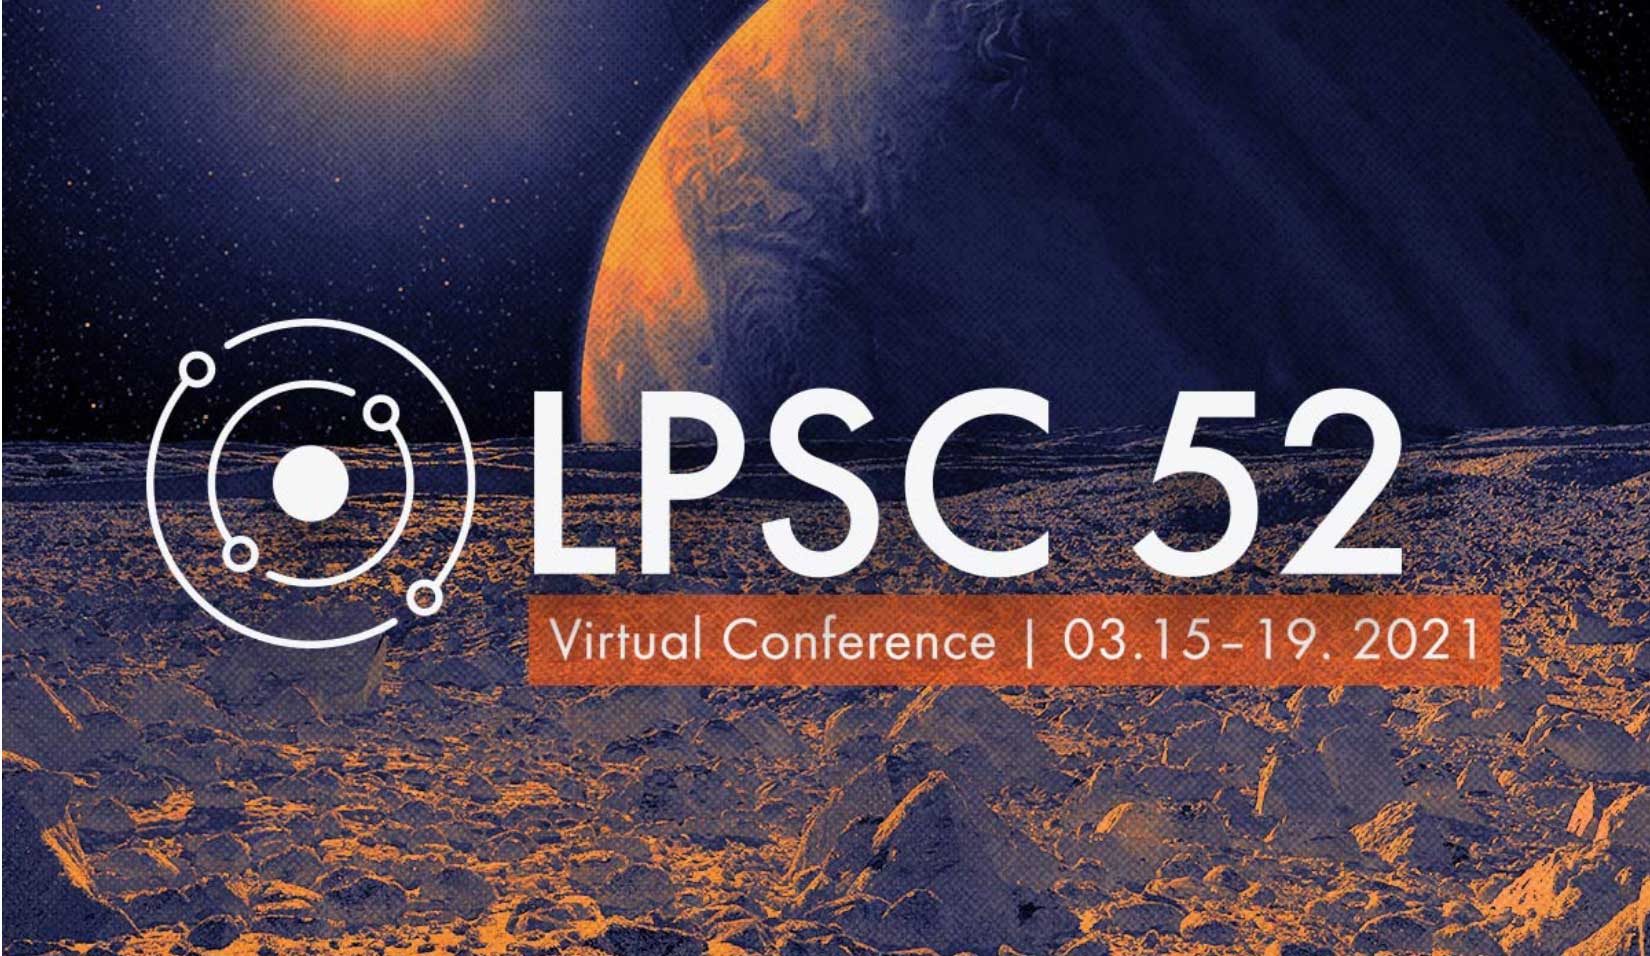 52nd Lunar and Science Conference